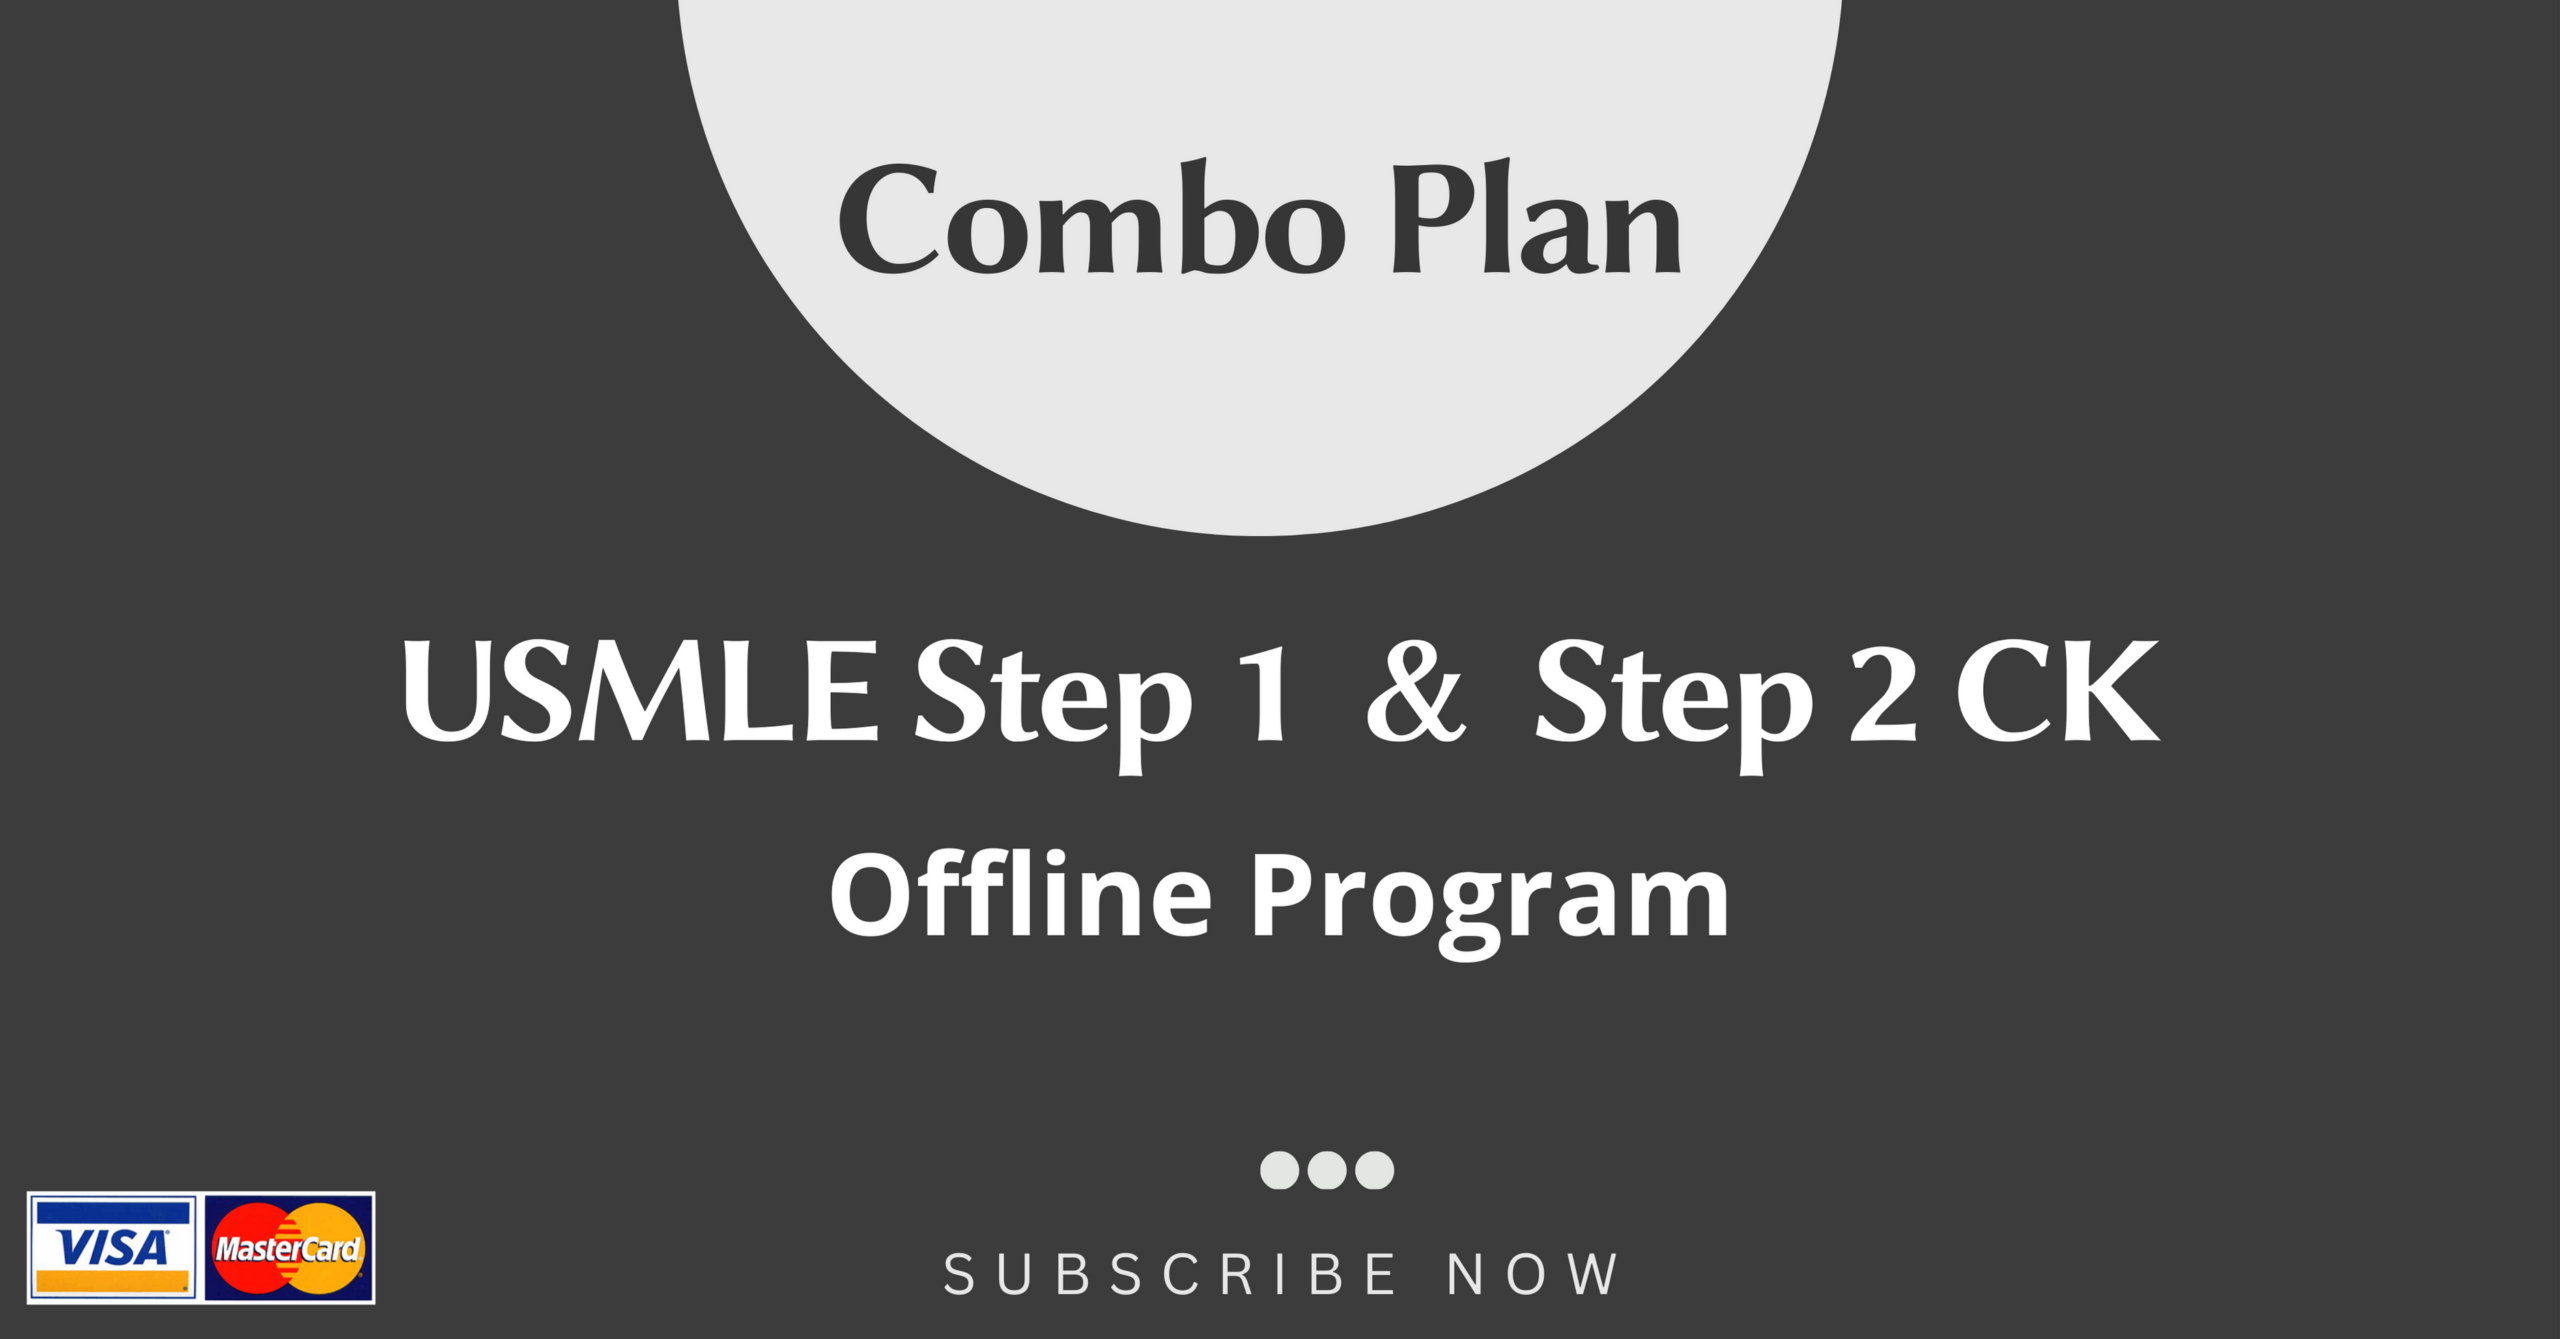 Elhusseiny USMLE Combo Plan for Offline step 1 and 2 CK